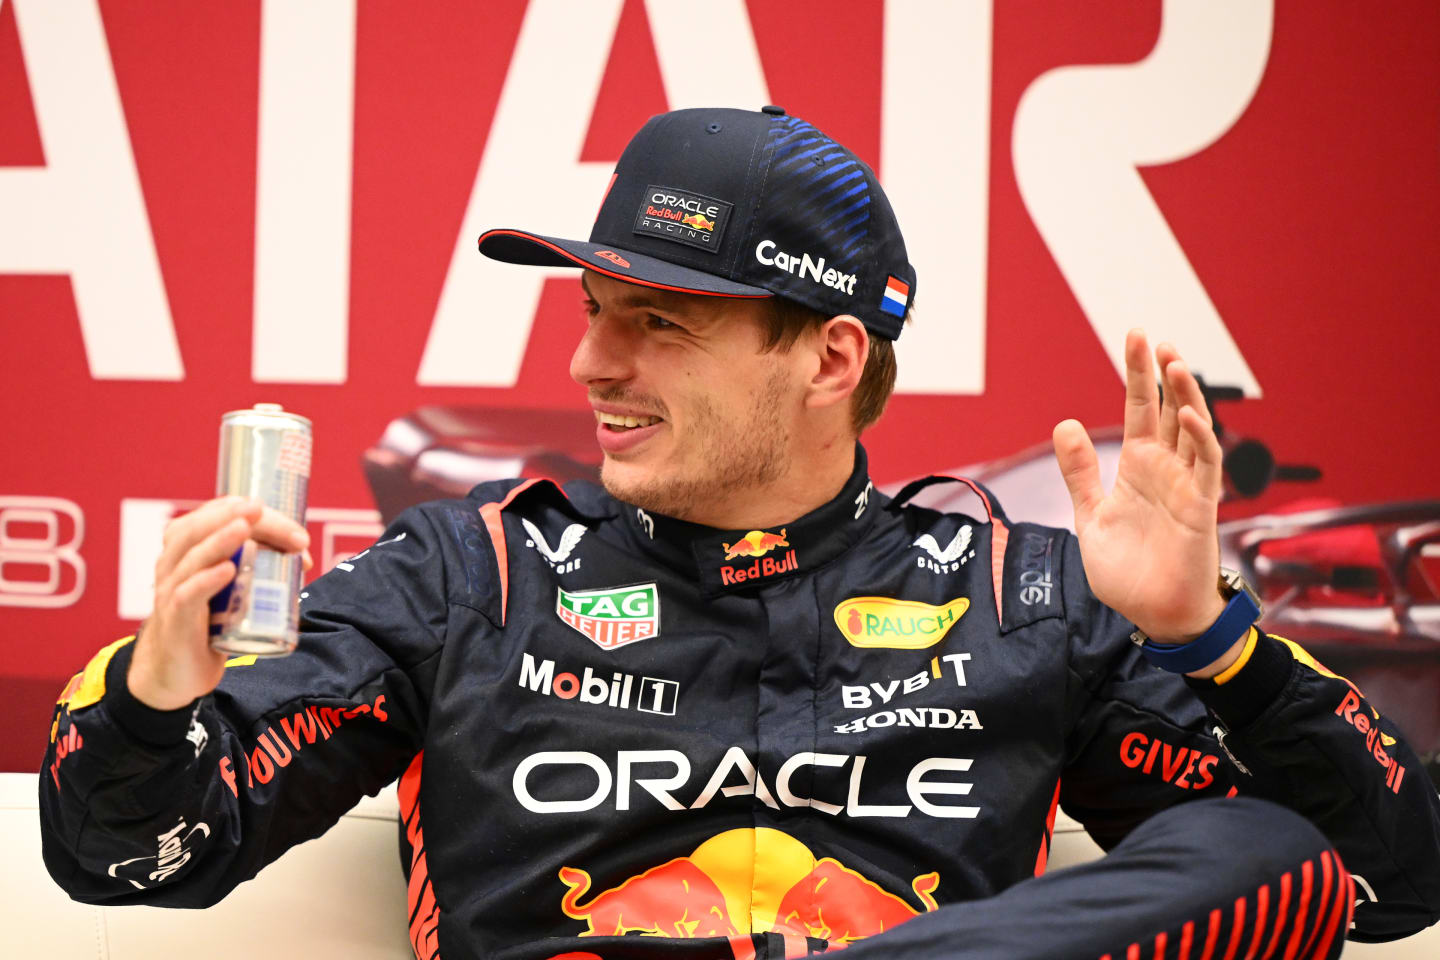 LUSAIL CITY, QATAR - OCTOBER 06: Pole position qualifier Max Verstappen of the Netherlands and Oracle Red Bull Racing attends the press conference after qualifying ahead of the F1 Grand Prix of Qatar at Lusail International Circuit on October 06, 2023 in Lusail City, Qatar. (Photo by Clive Mason/Getty Images)